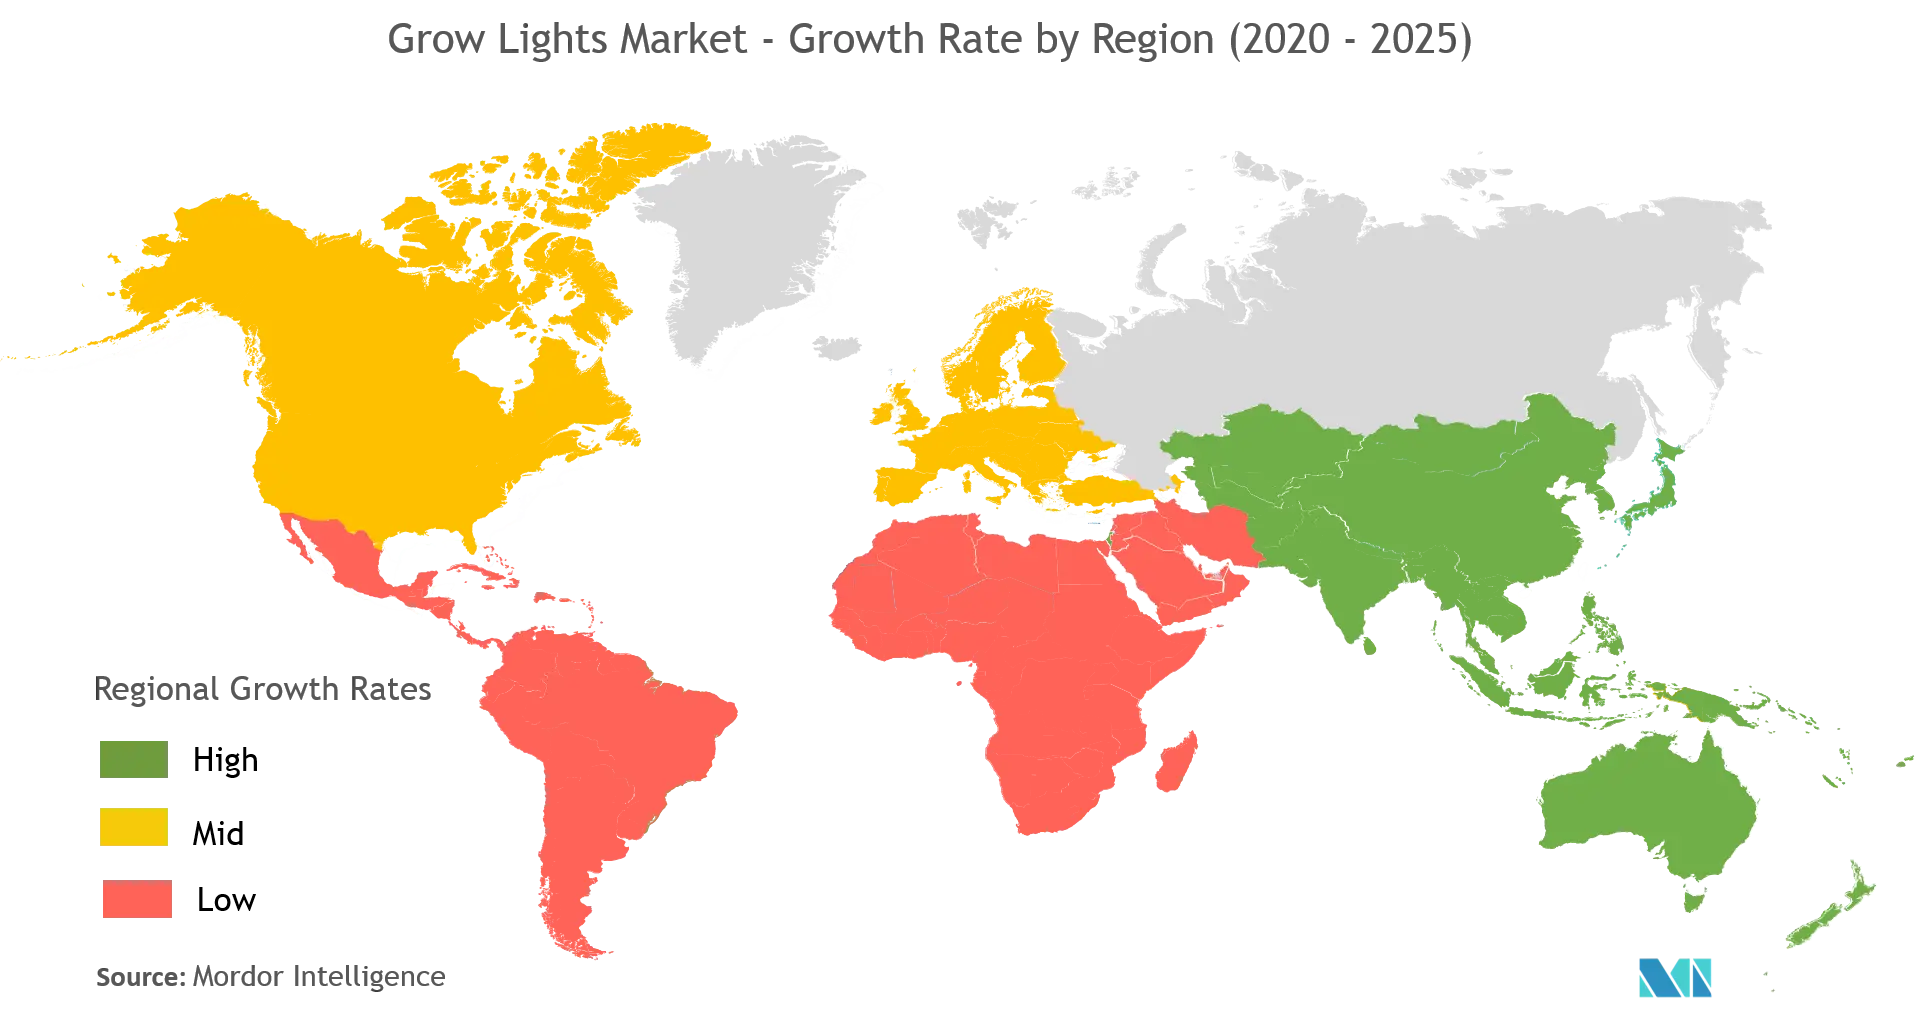 Grow Lights Market Growth Rate By Region